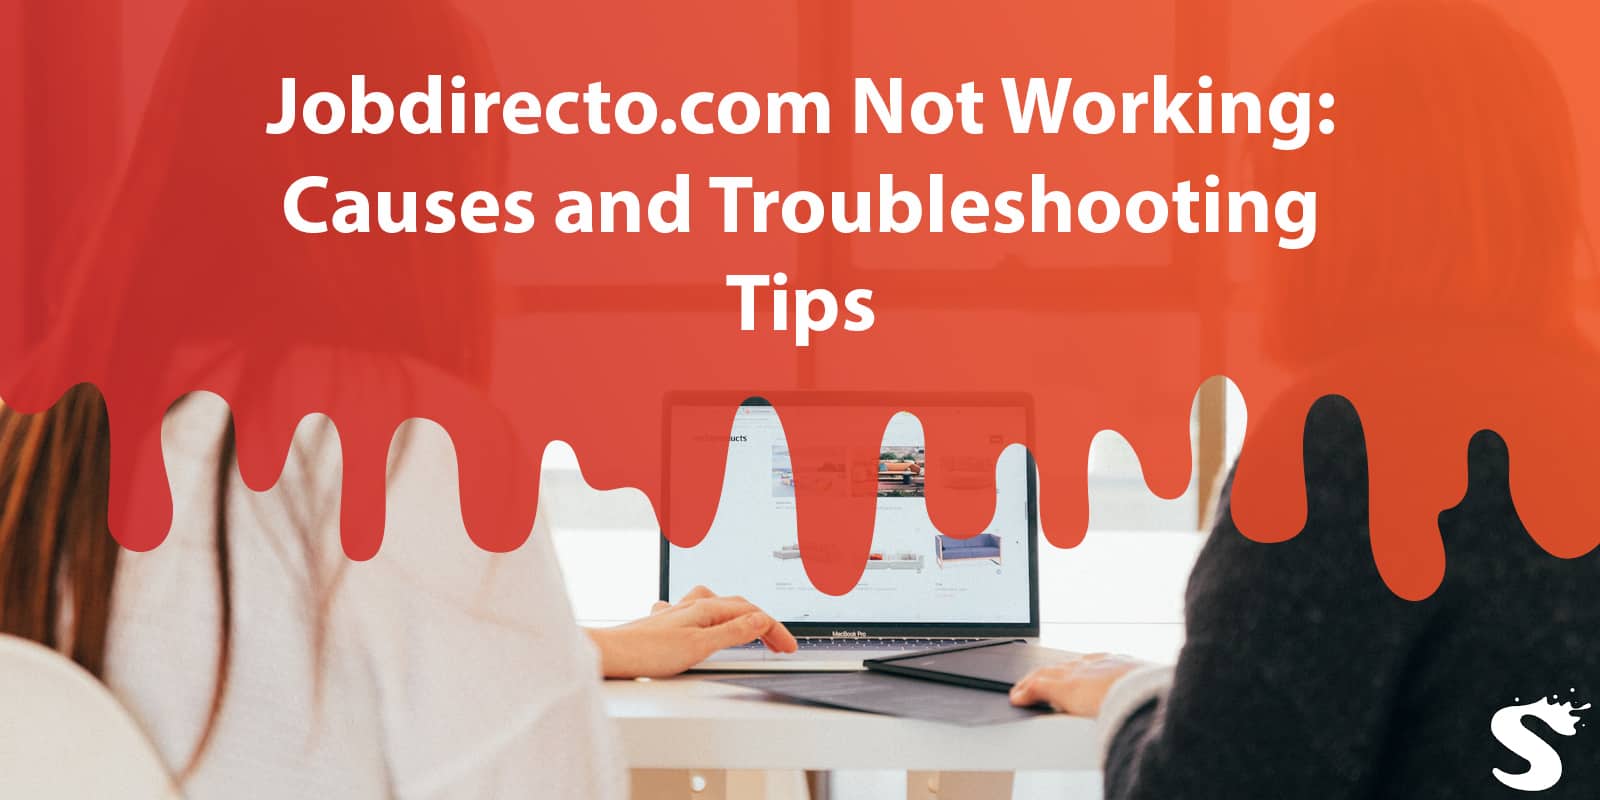 Jobdirecto.com Not Working: Causes and Troubleshooting Tips